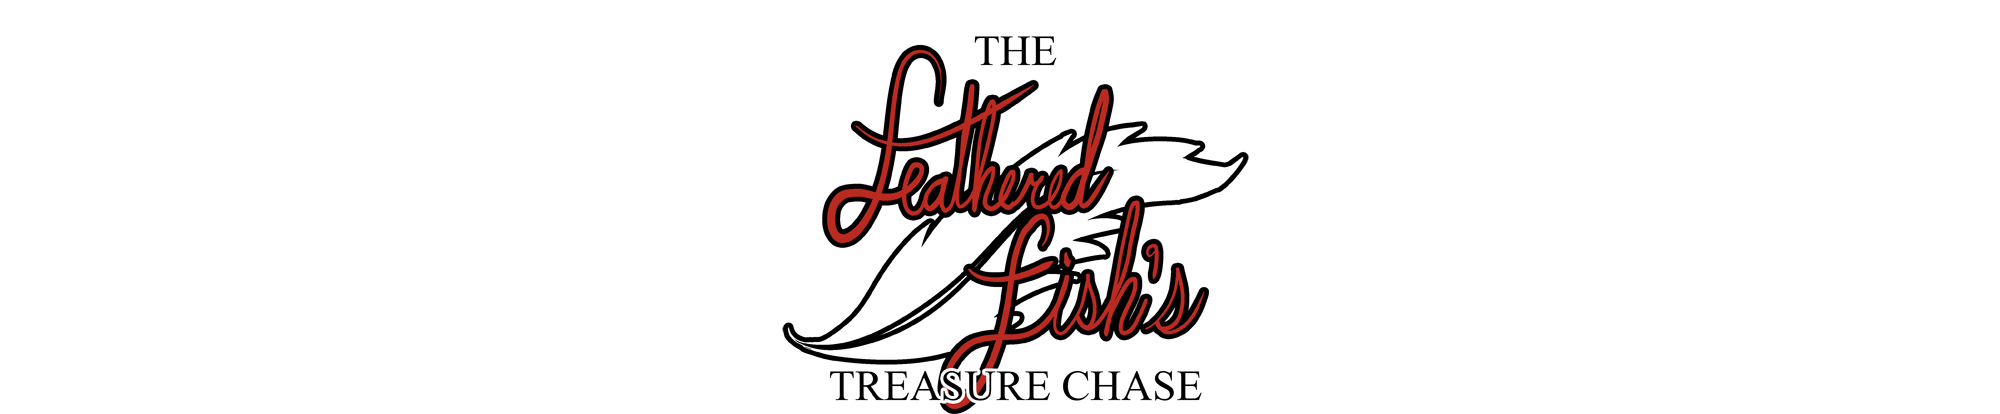 The Feathered Fish's Treasure Chase